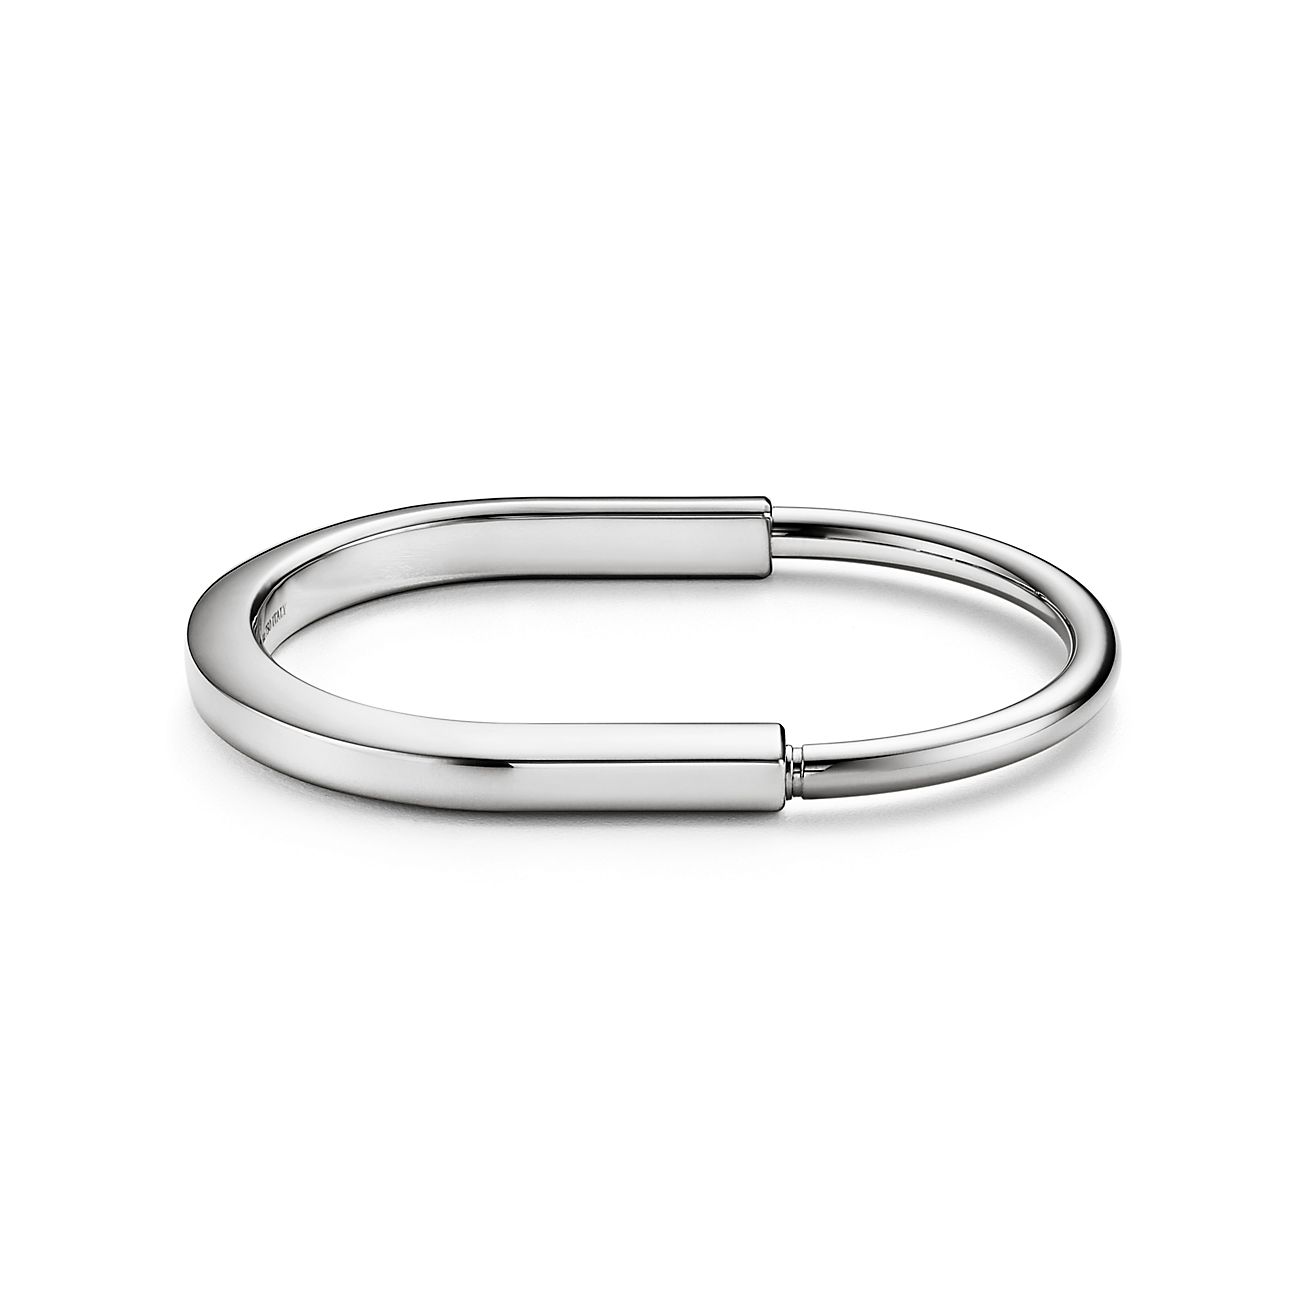 Tiffany & Co.'s New Lock Collection